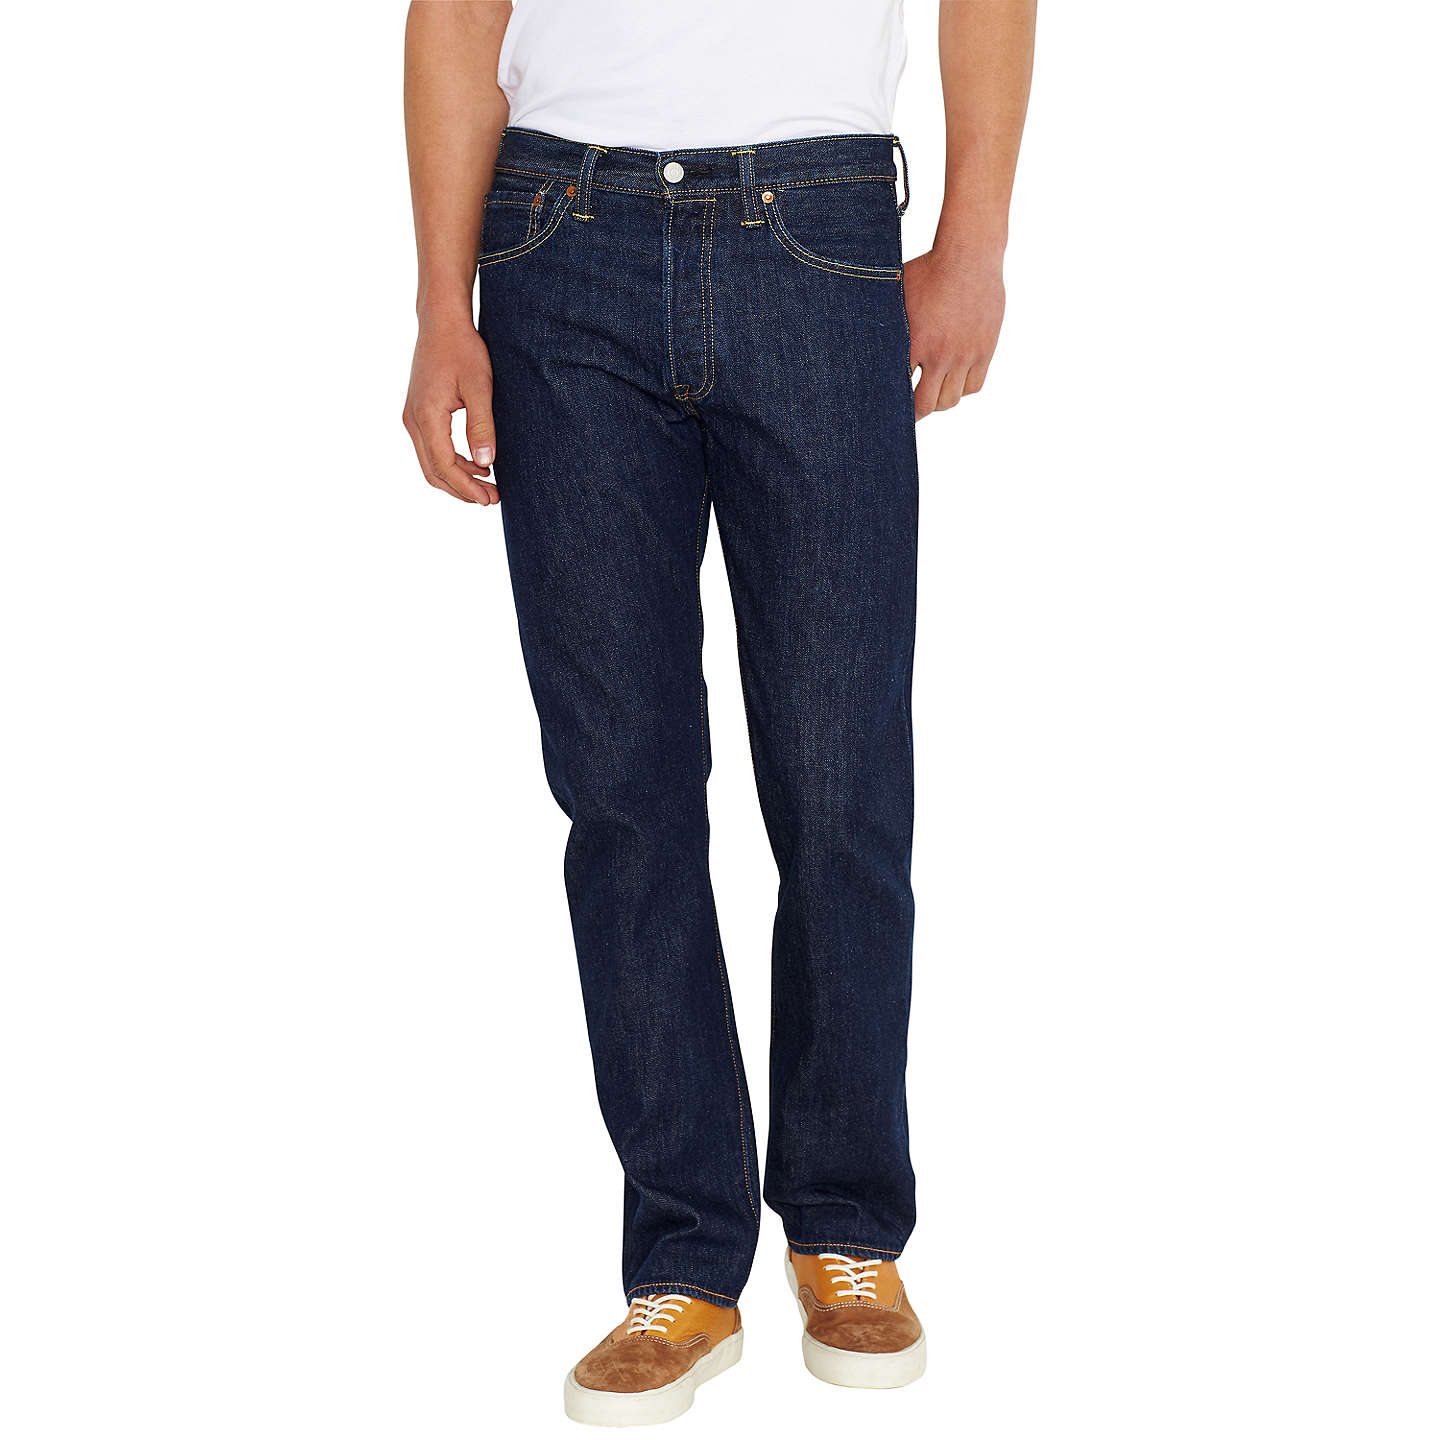 Levi's 501 Original Straight Jeans, One Wash at John Lewis